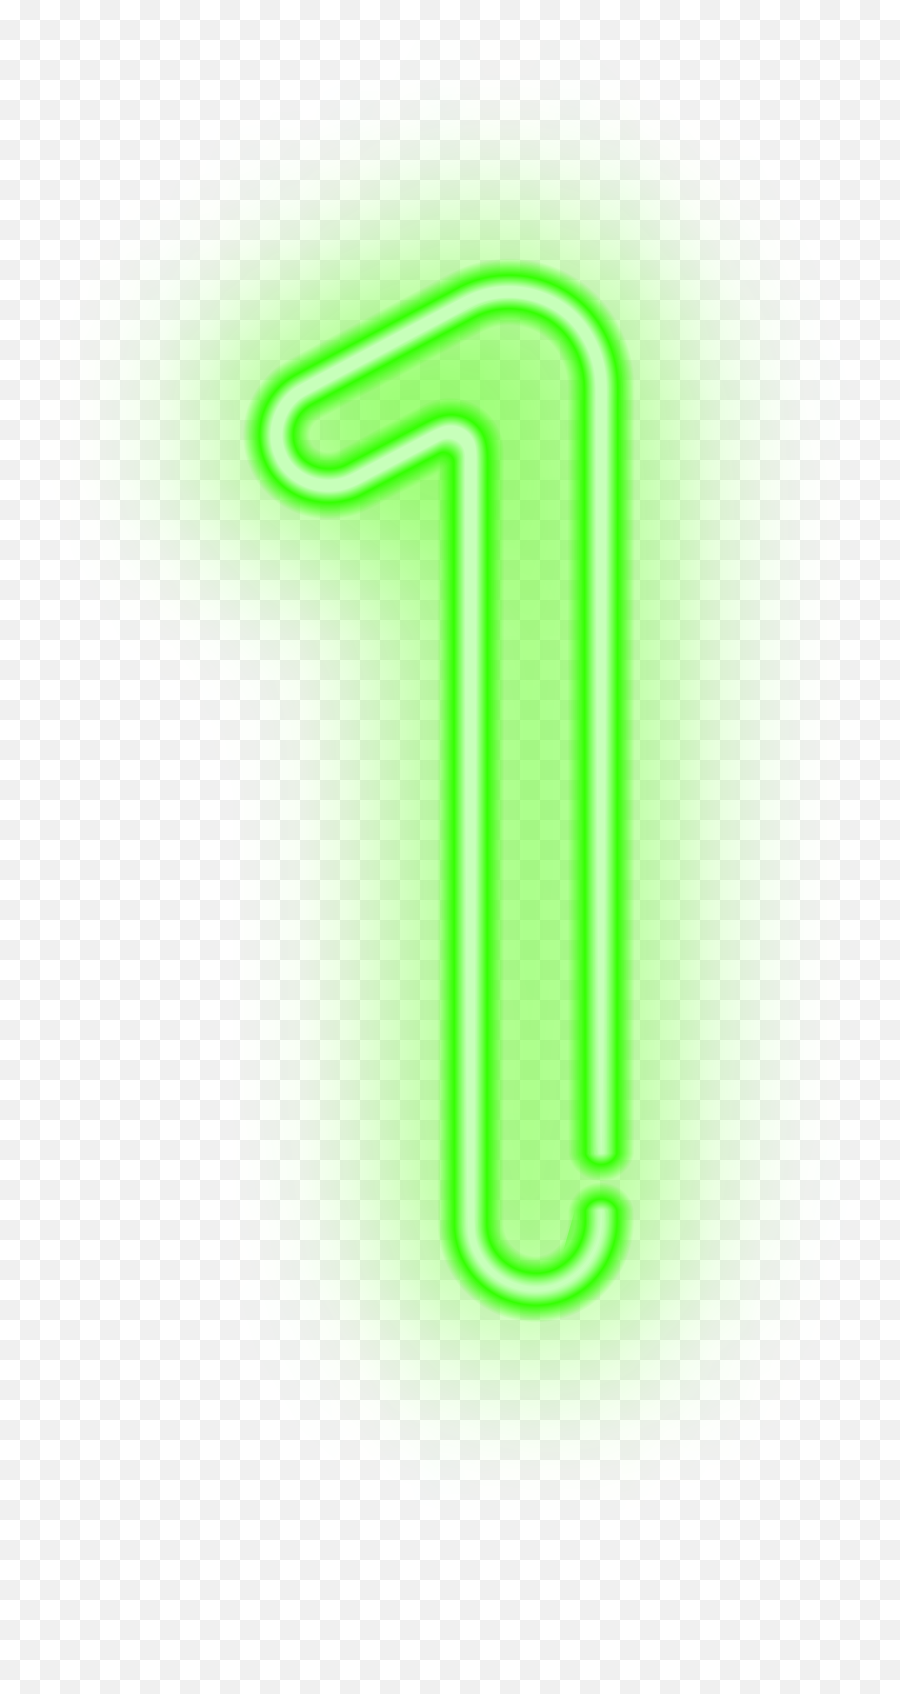 One Neon Green Png Clip Art Image - Gallery Yopriceville Com Three Neon Green,Neon Png